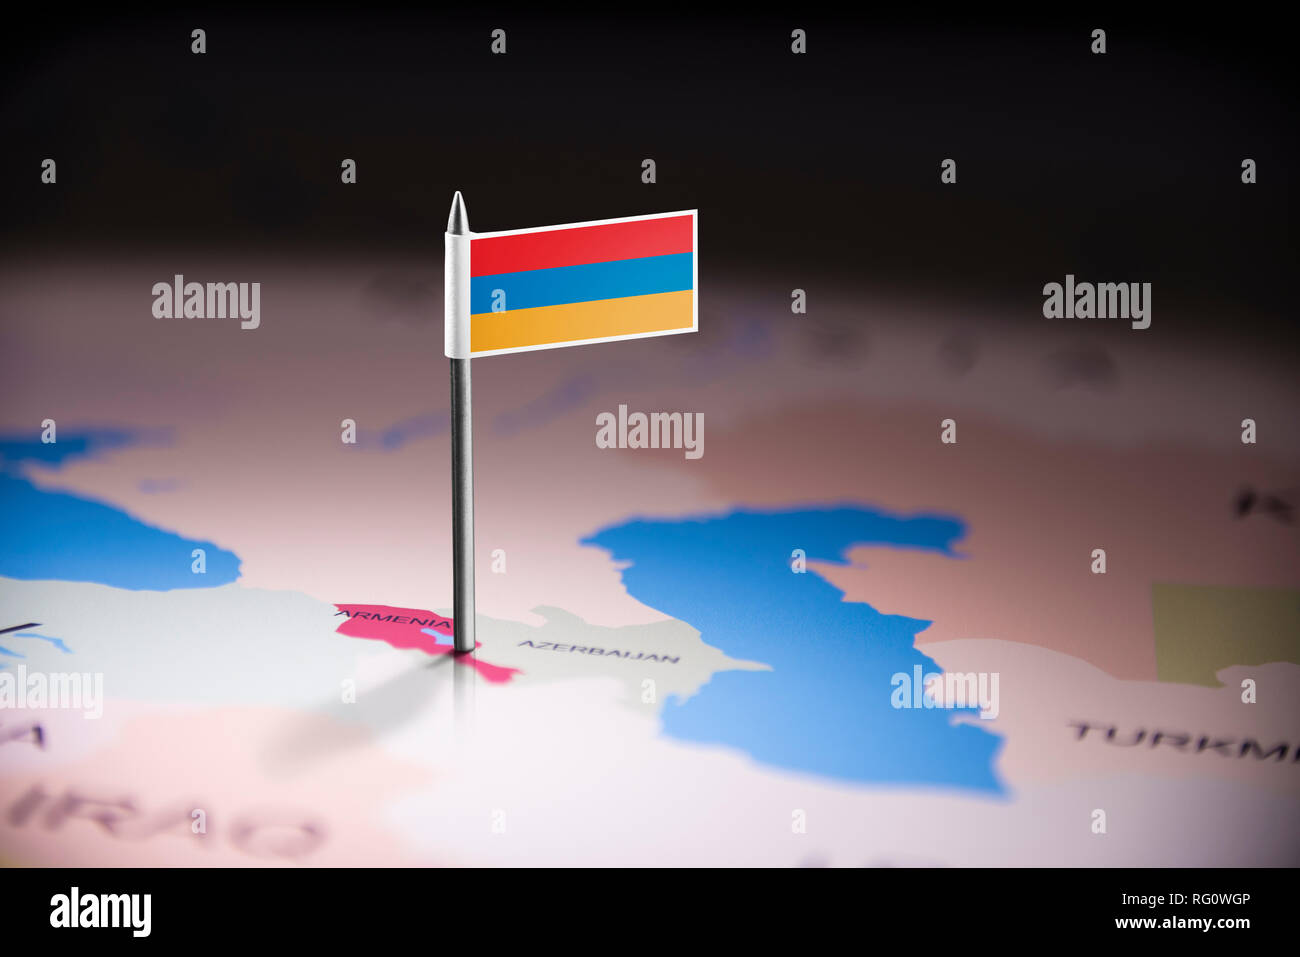 Armenia marked with a flag on the map Stock Photo